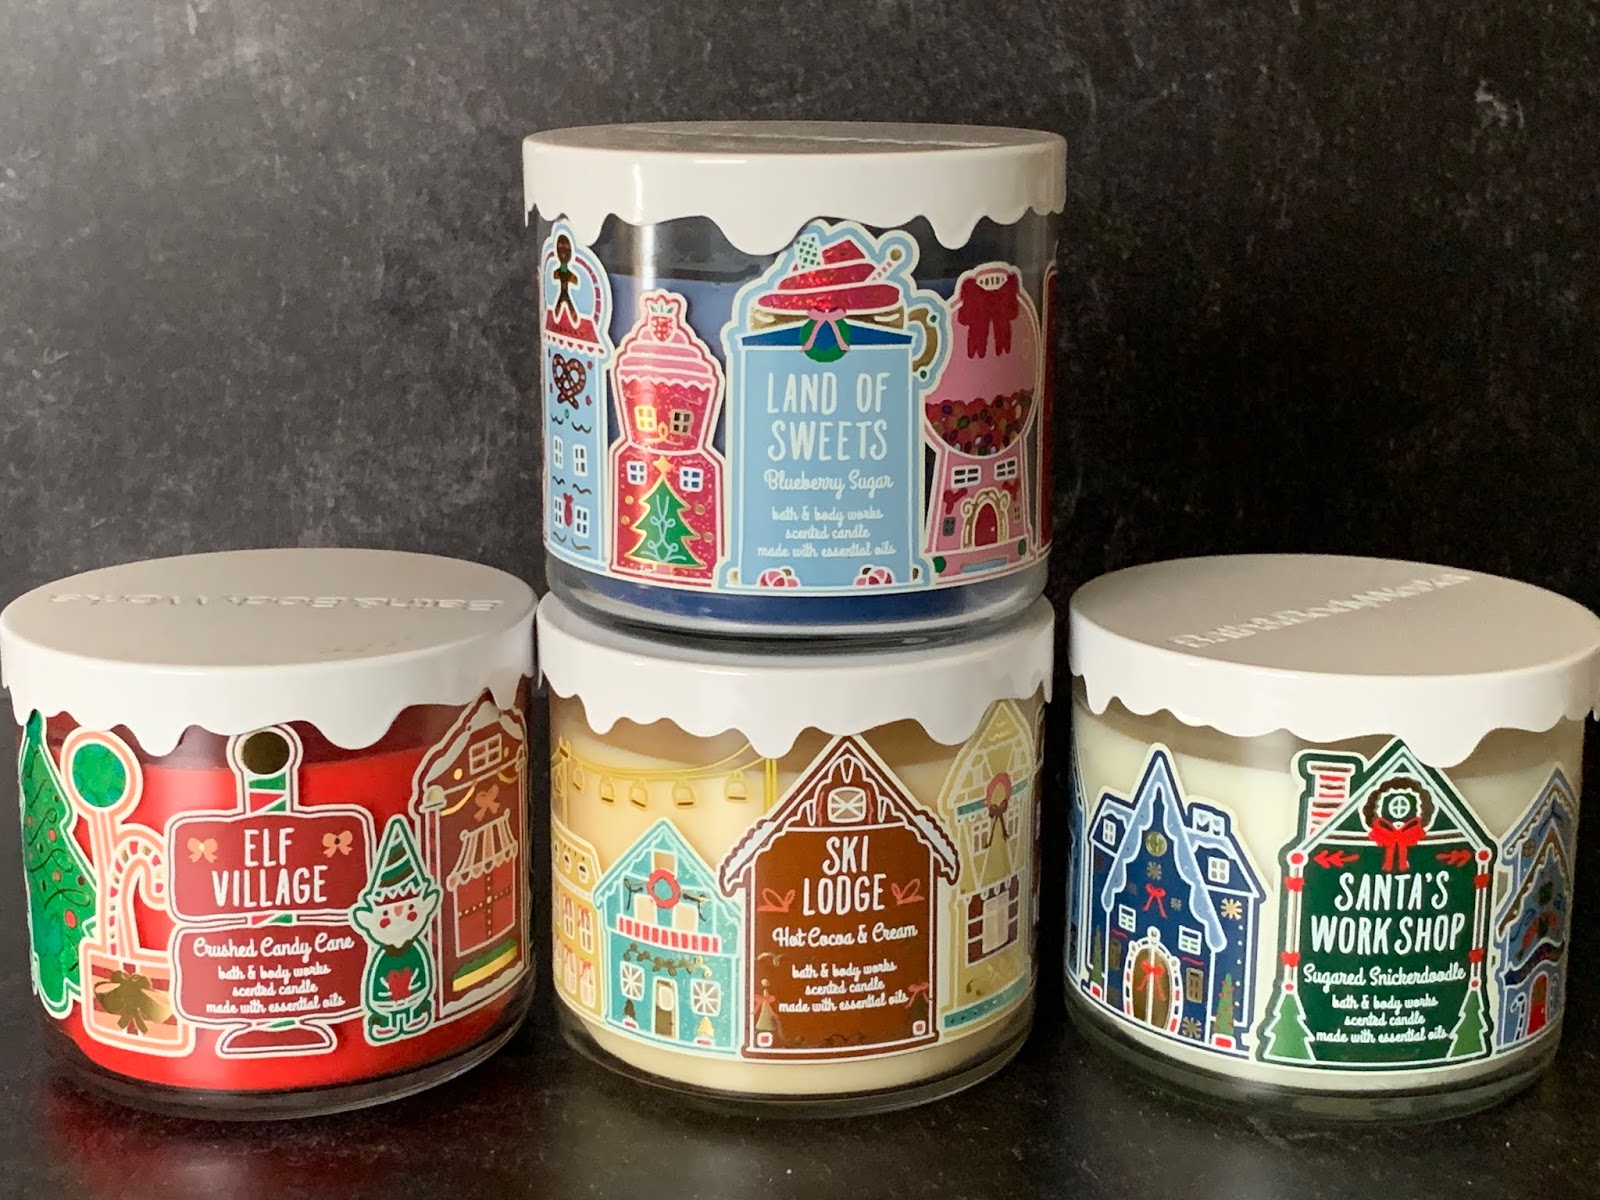 2019 Bath And Body Works Candle Day Is December 7: Make Your List! | A Very Sweet Blog